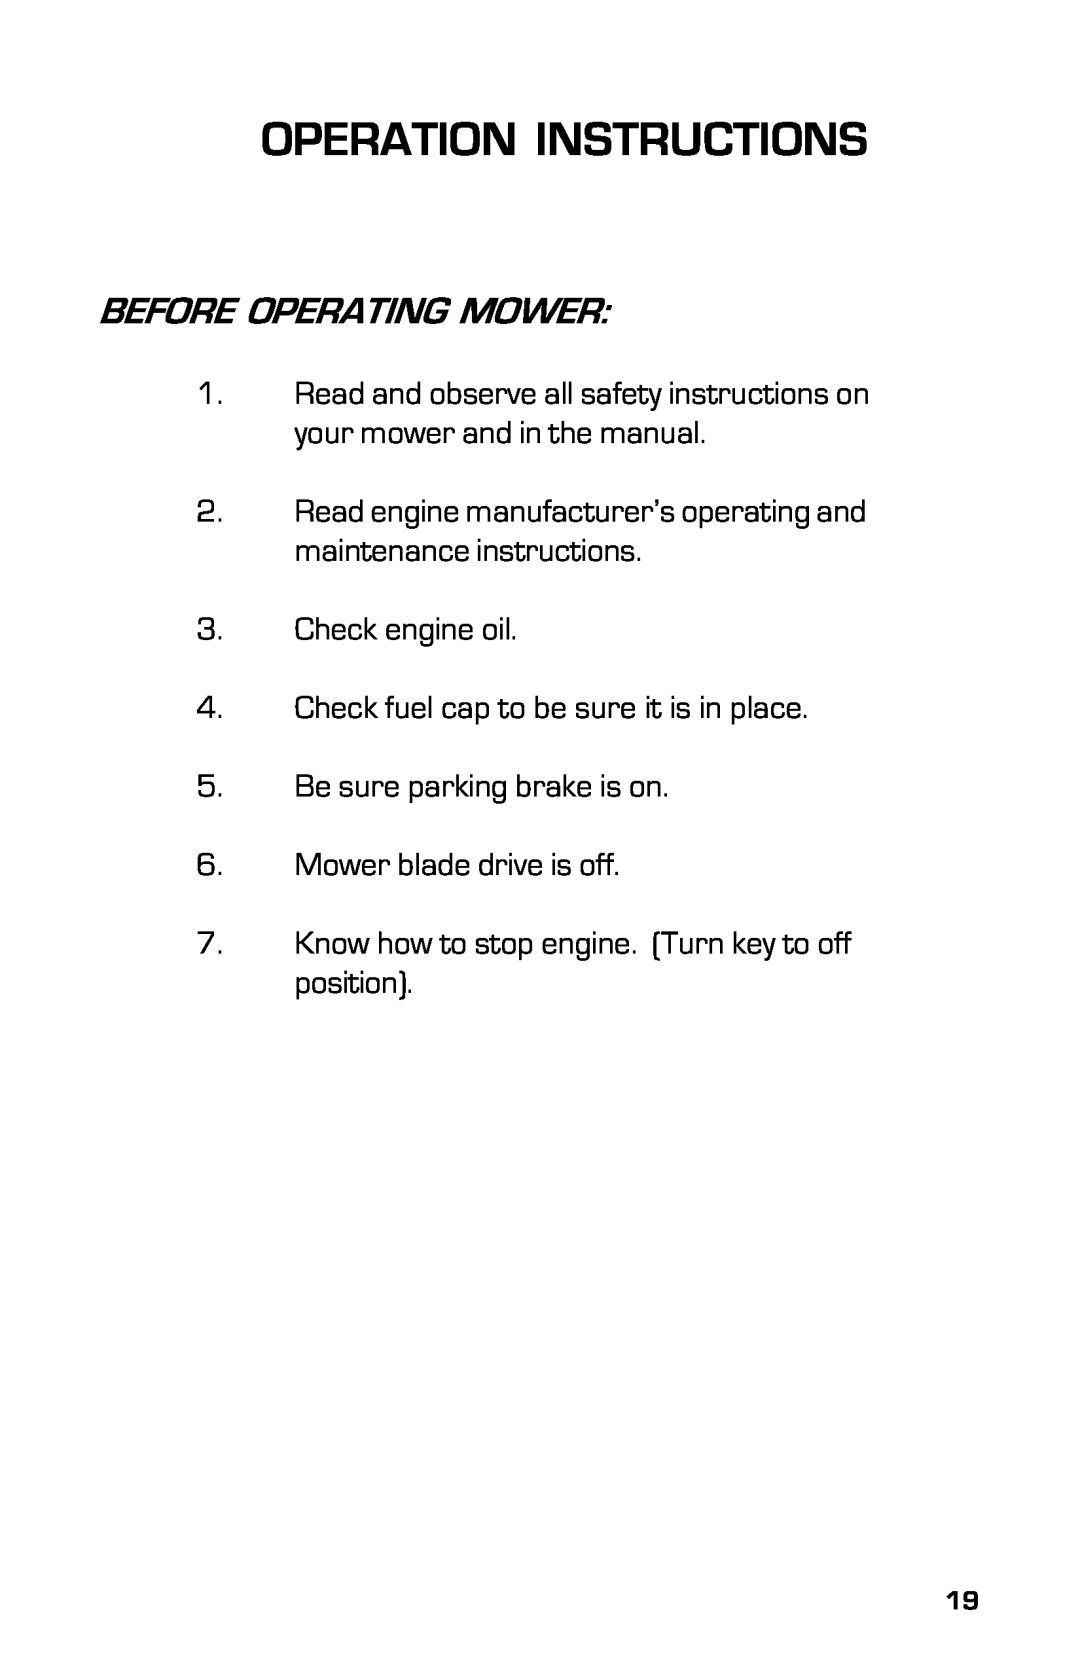 Dixon 13639-0702, 2003 manual Operation Instructions, Before Operating Mower, Check engine oil, Be sure parking brake is on 